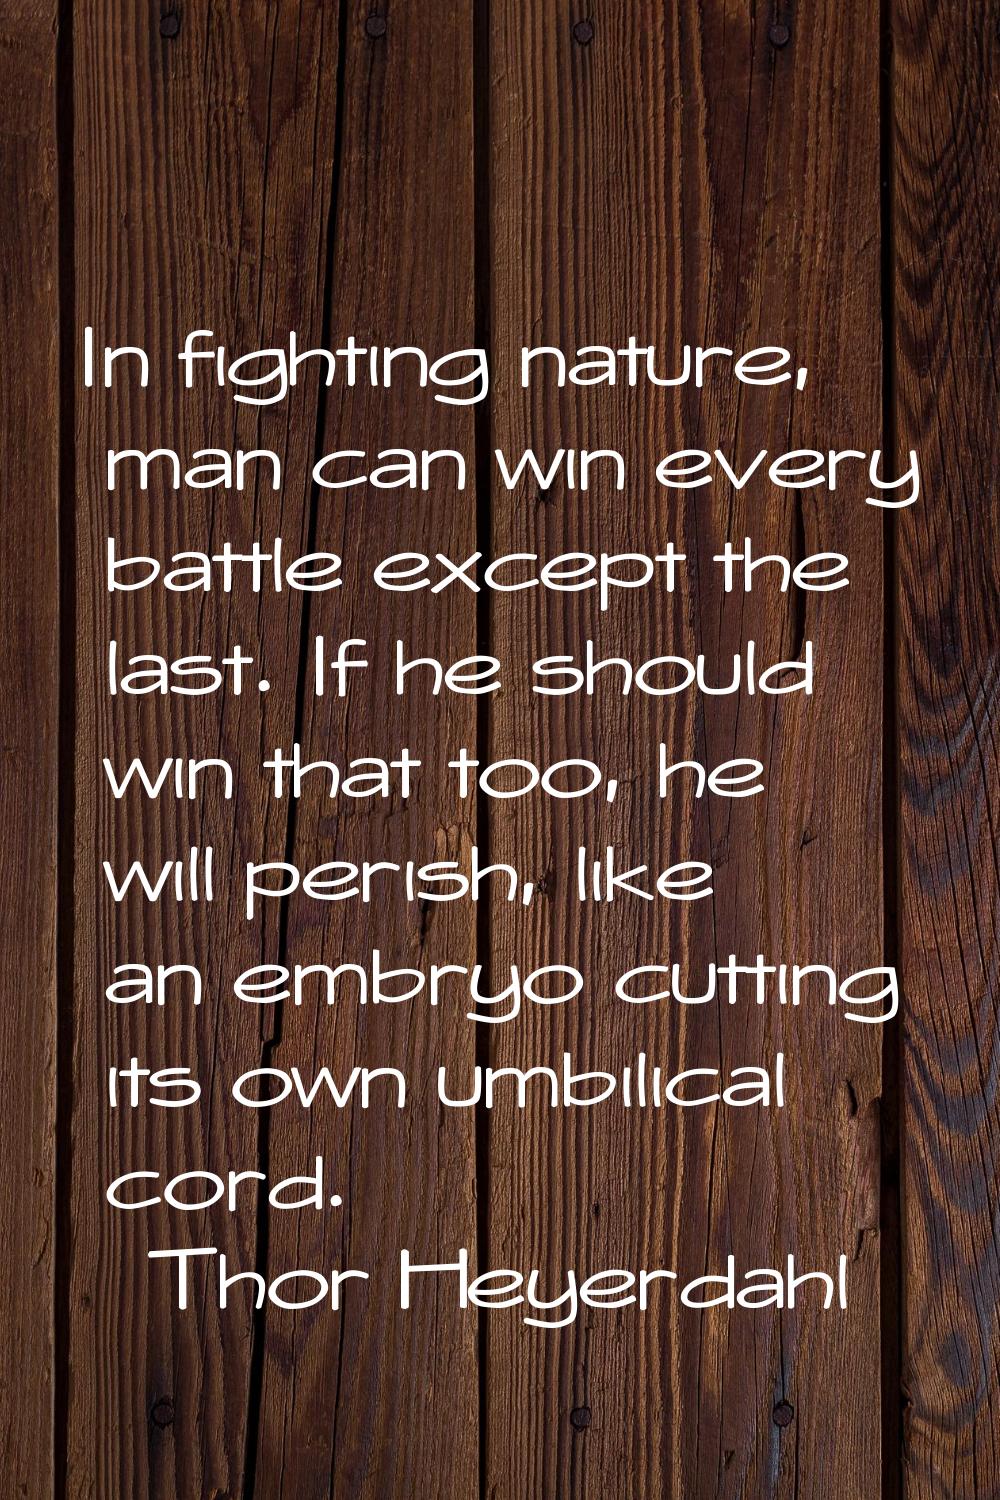 In fighting nature, man can win every battle except the last. If he should win that too, he will pe